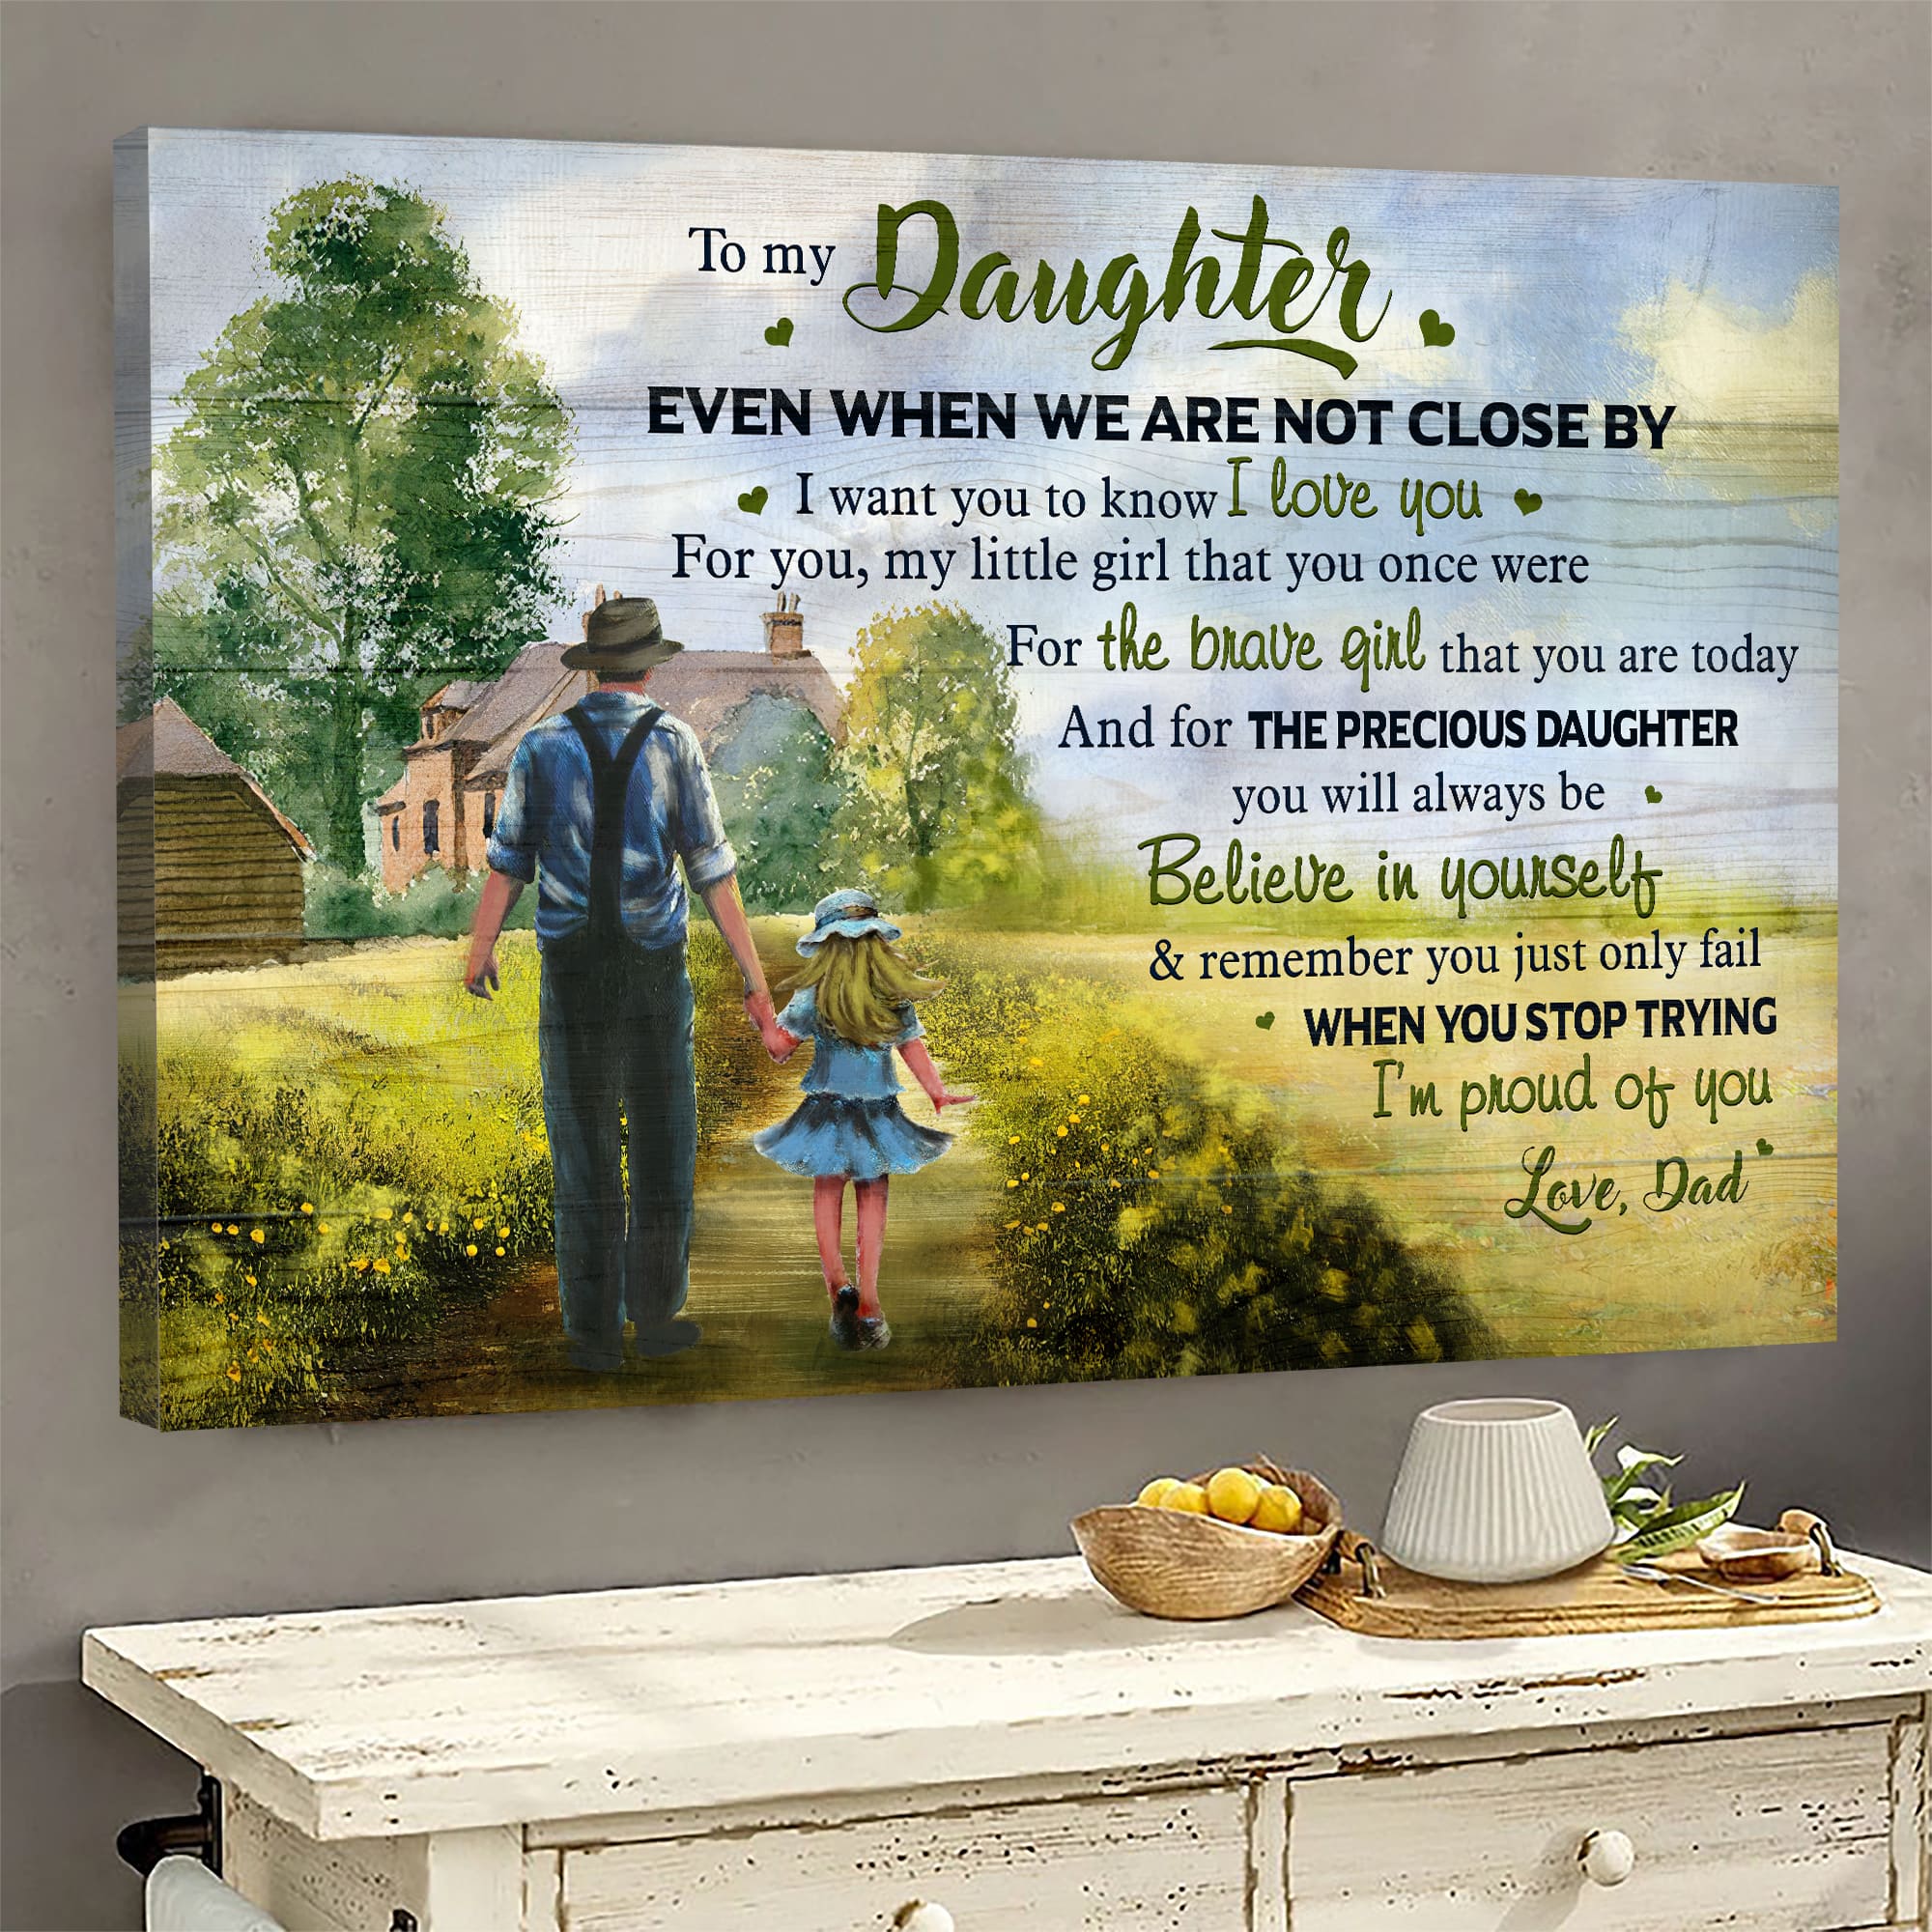 Dad to daughter, Walking, Peaceful life, Coming home together, You are my precious daughter - Family Landscape Canvas Prints, Wall Art